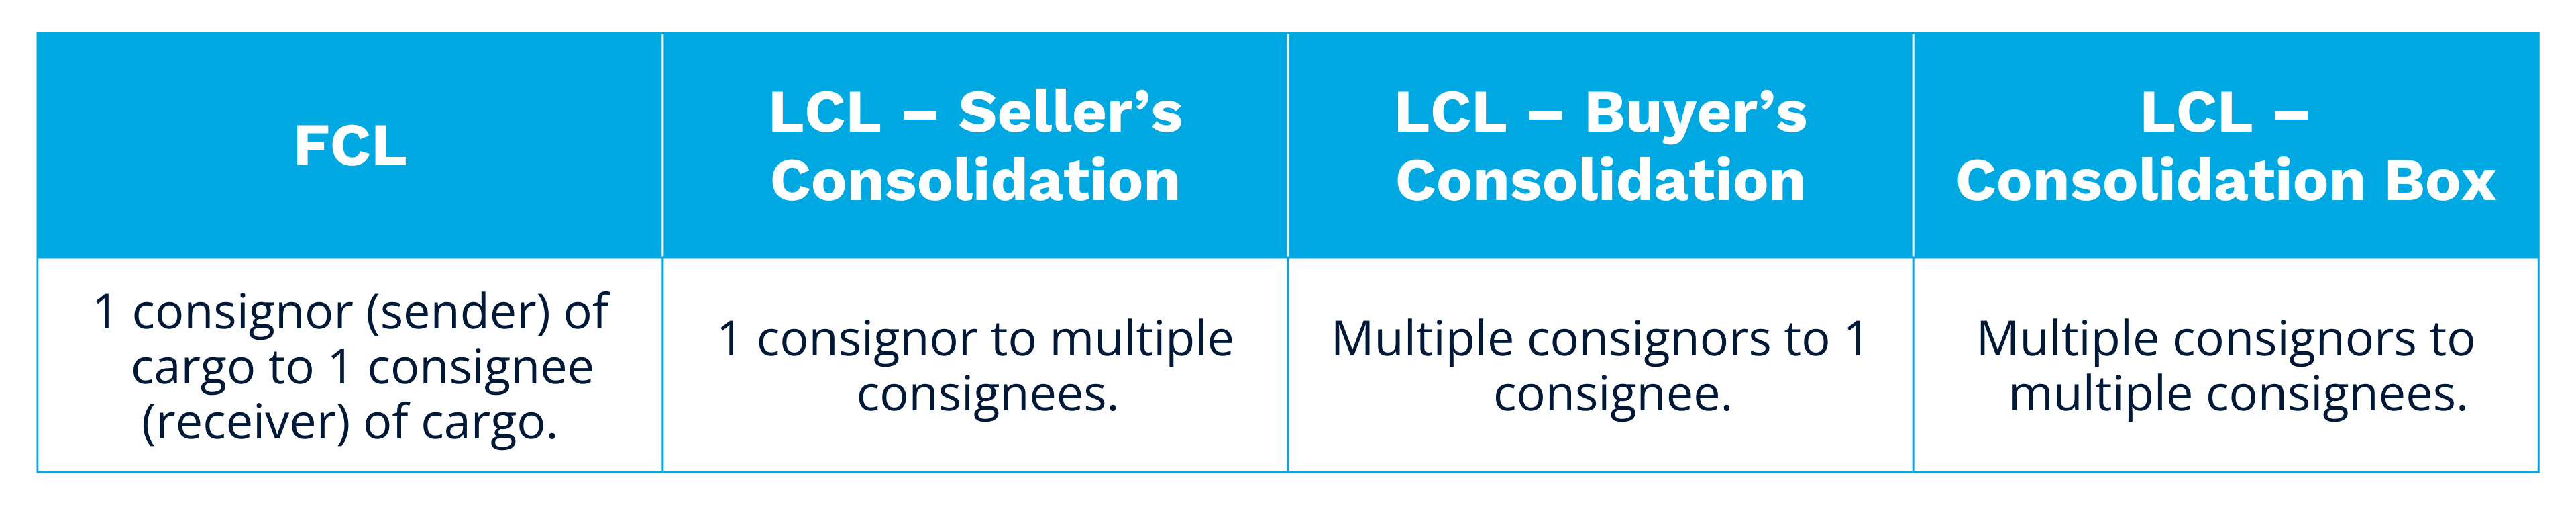 Types of LCL Consolidation